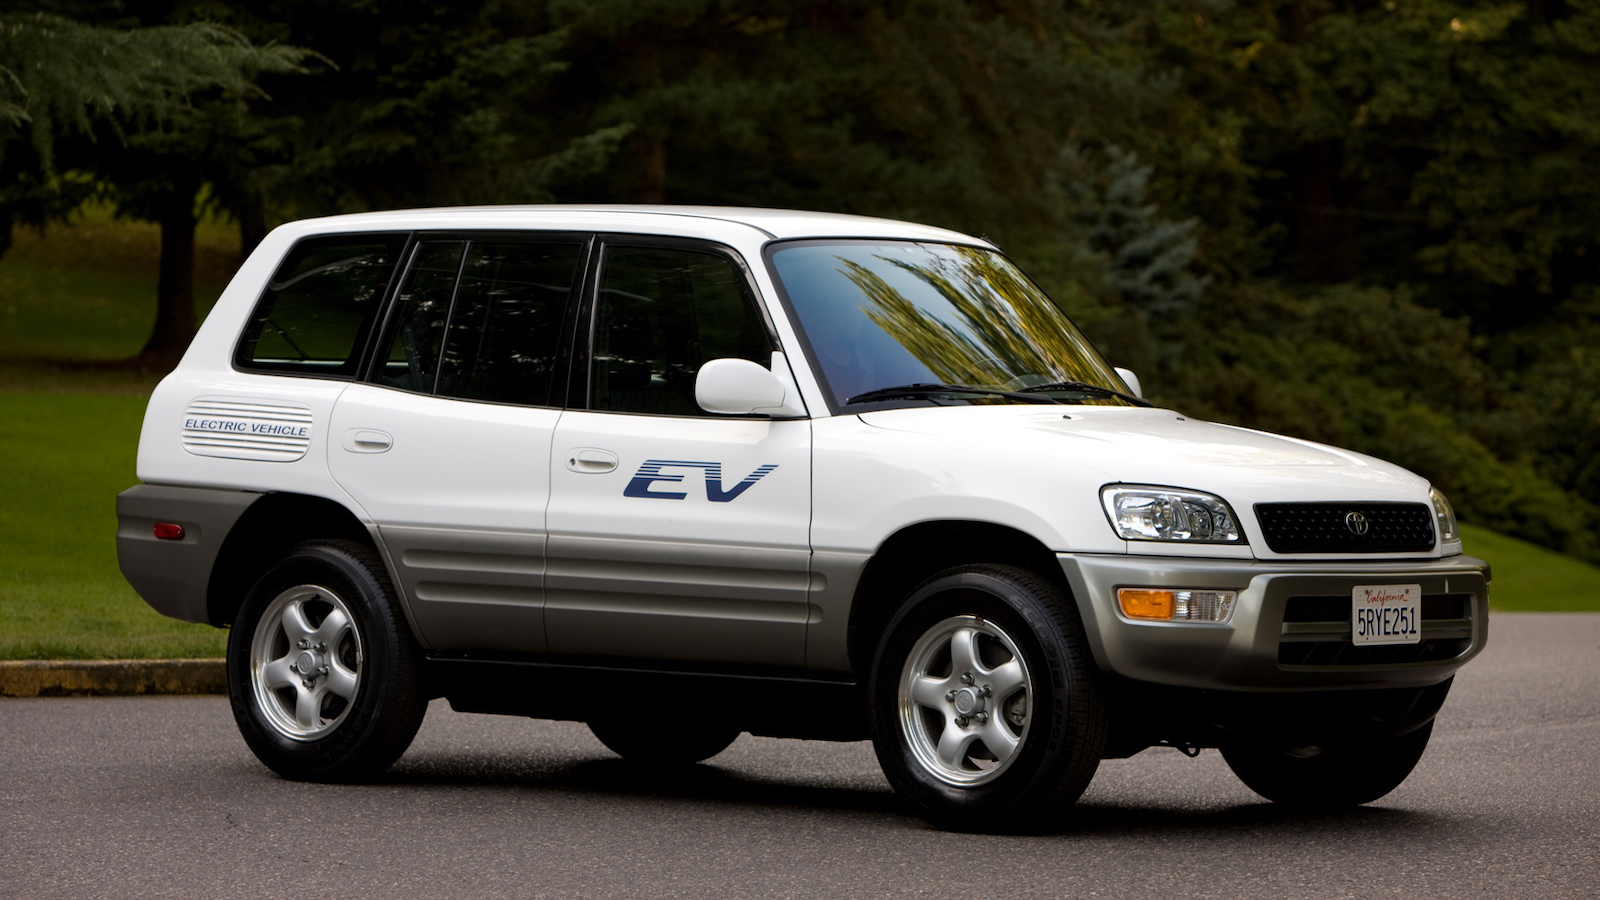 The RAV4 EV could have brought electric power to the mainstream | Top Gear